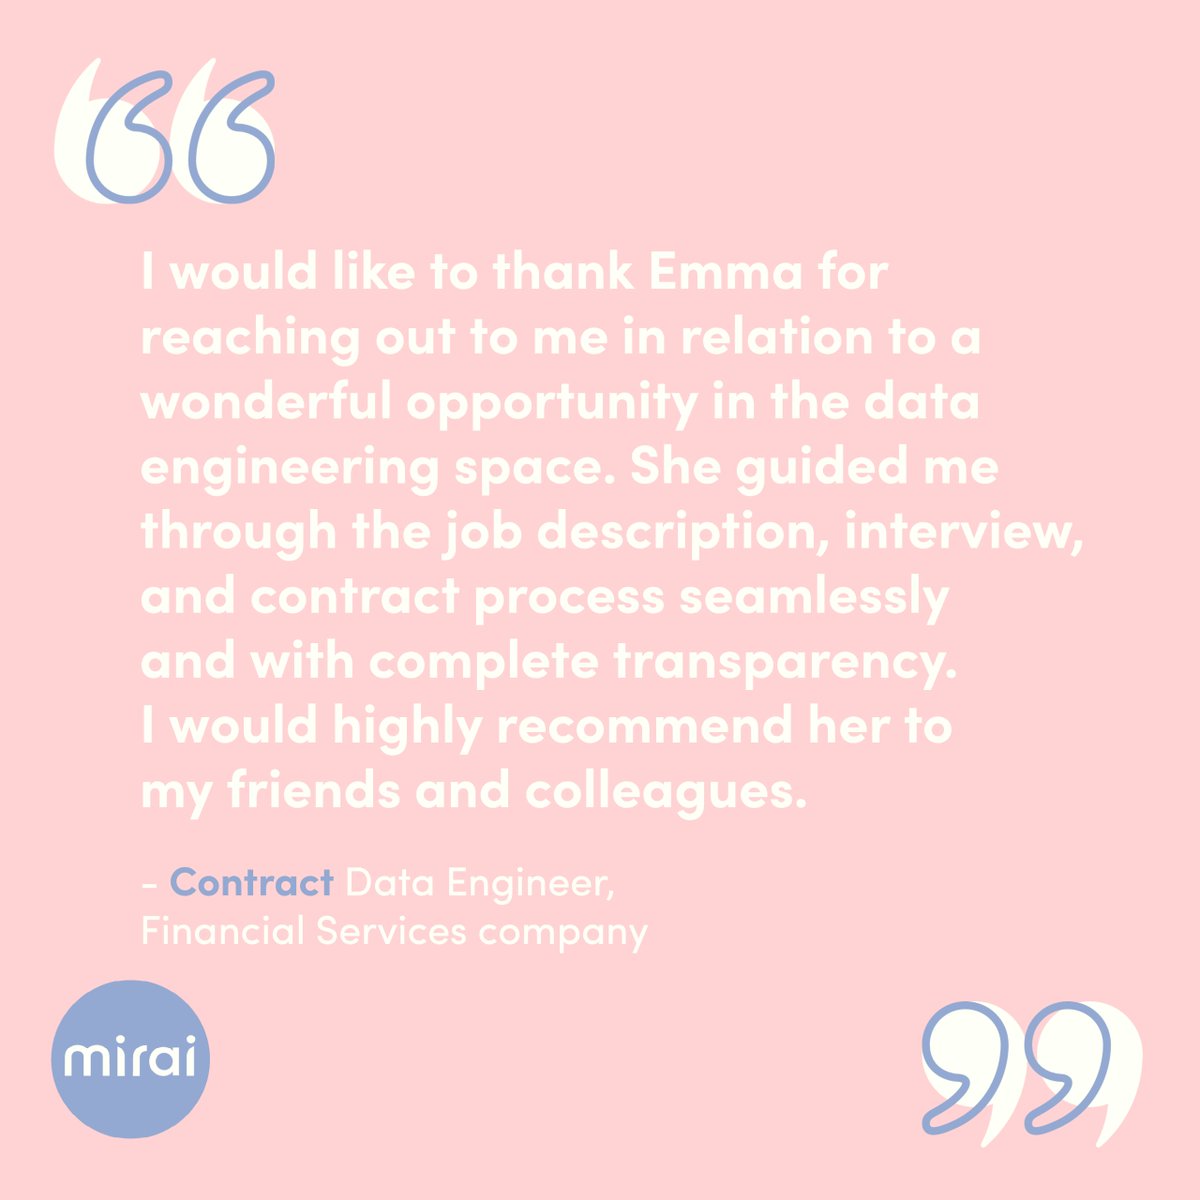 It's time for another #FeedbackFriday! We were thrilled to hear such lovely words from the wonderful Contract Data Engineer we recently placed within a Financial Services company. 

#techrecruiter #recruitment #techjobs #tech #womeninstem #stem